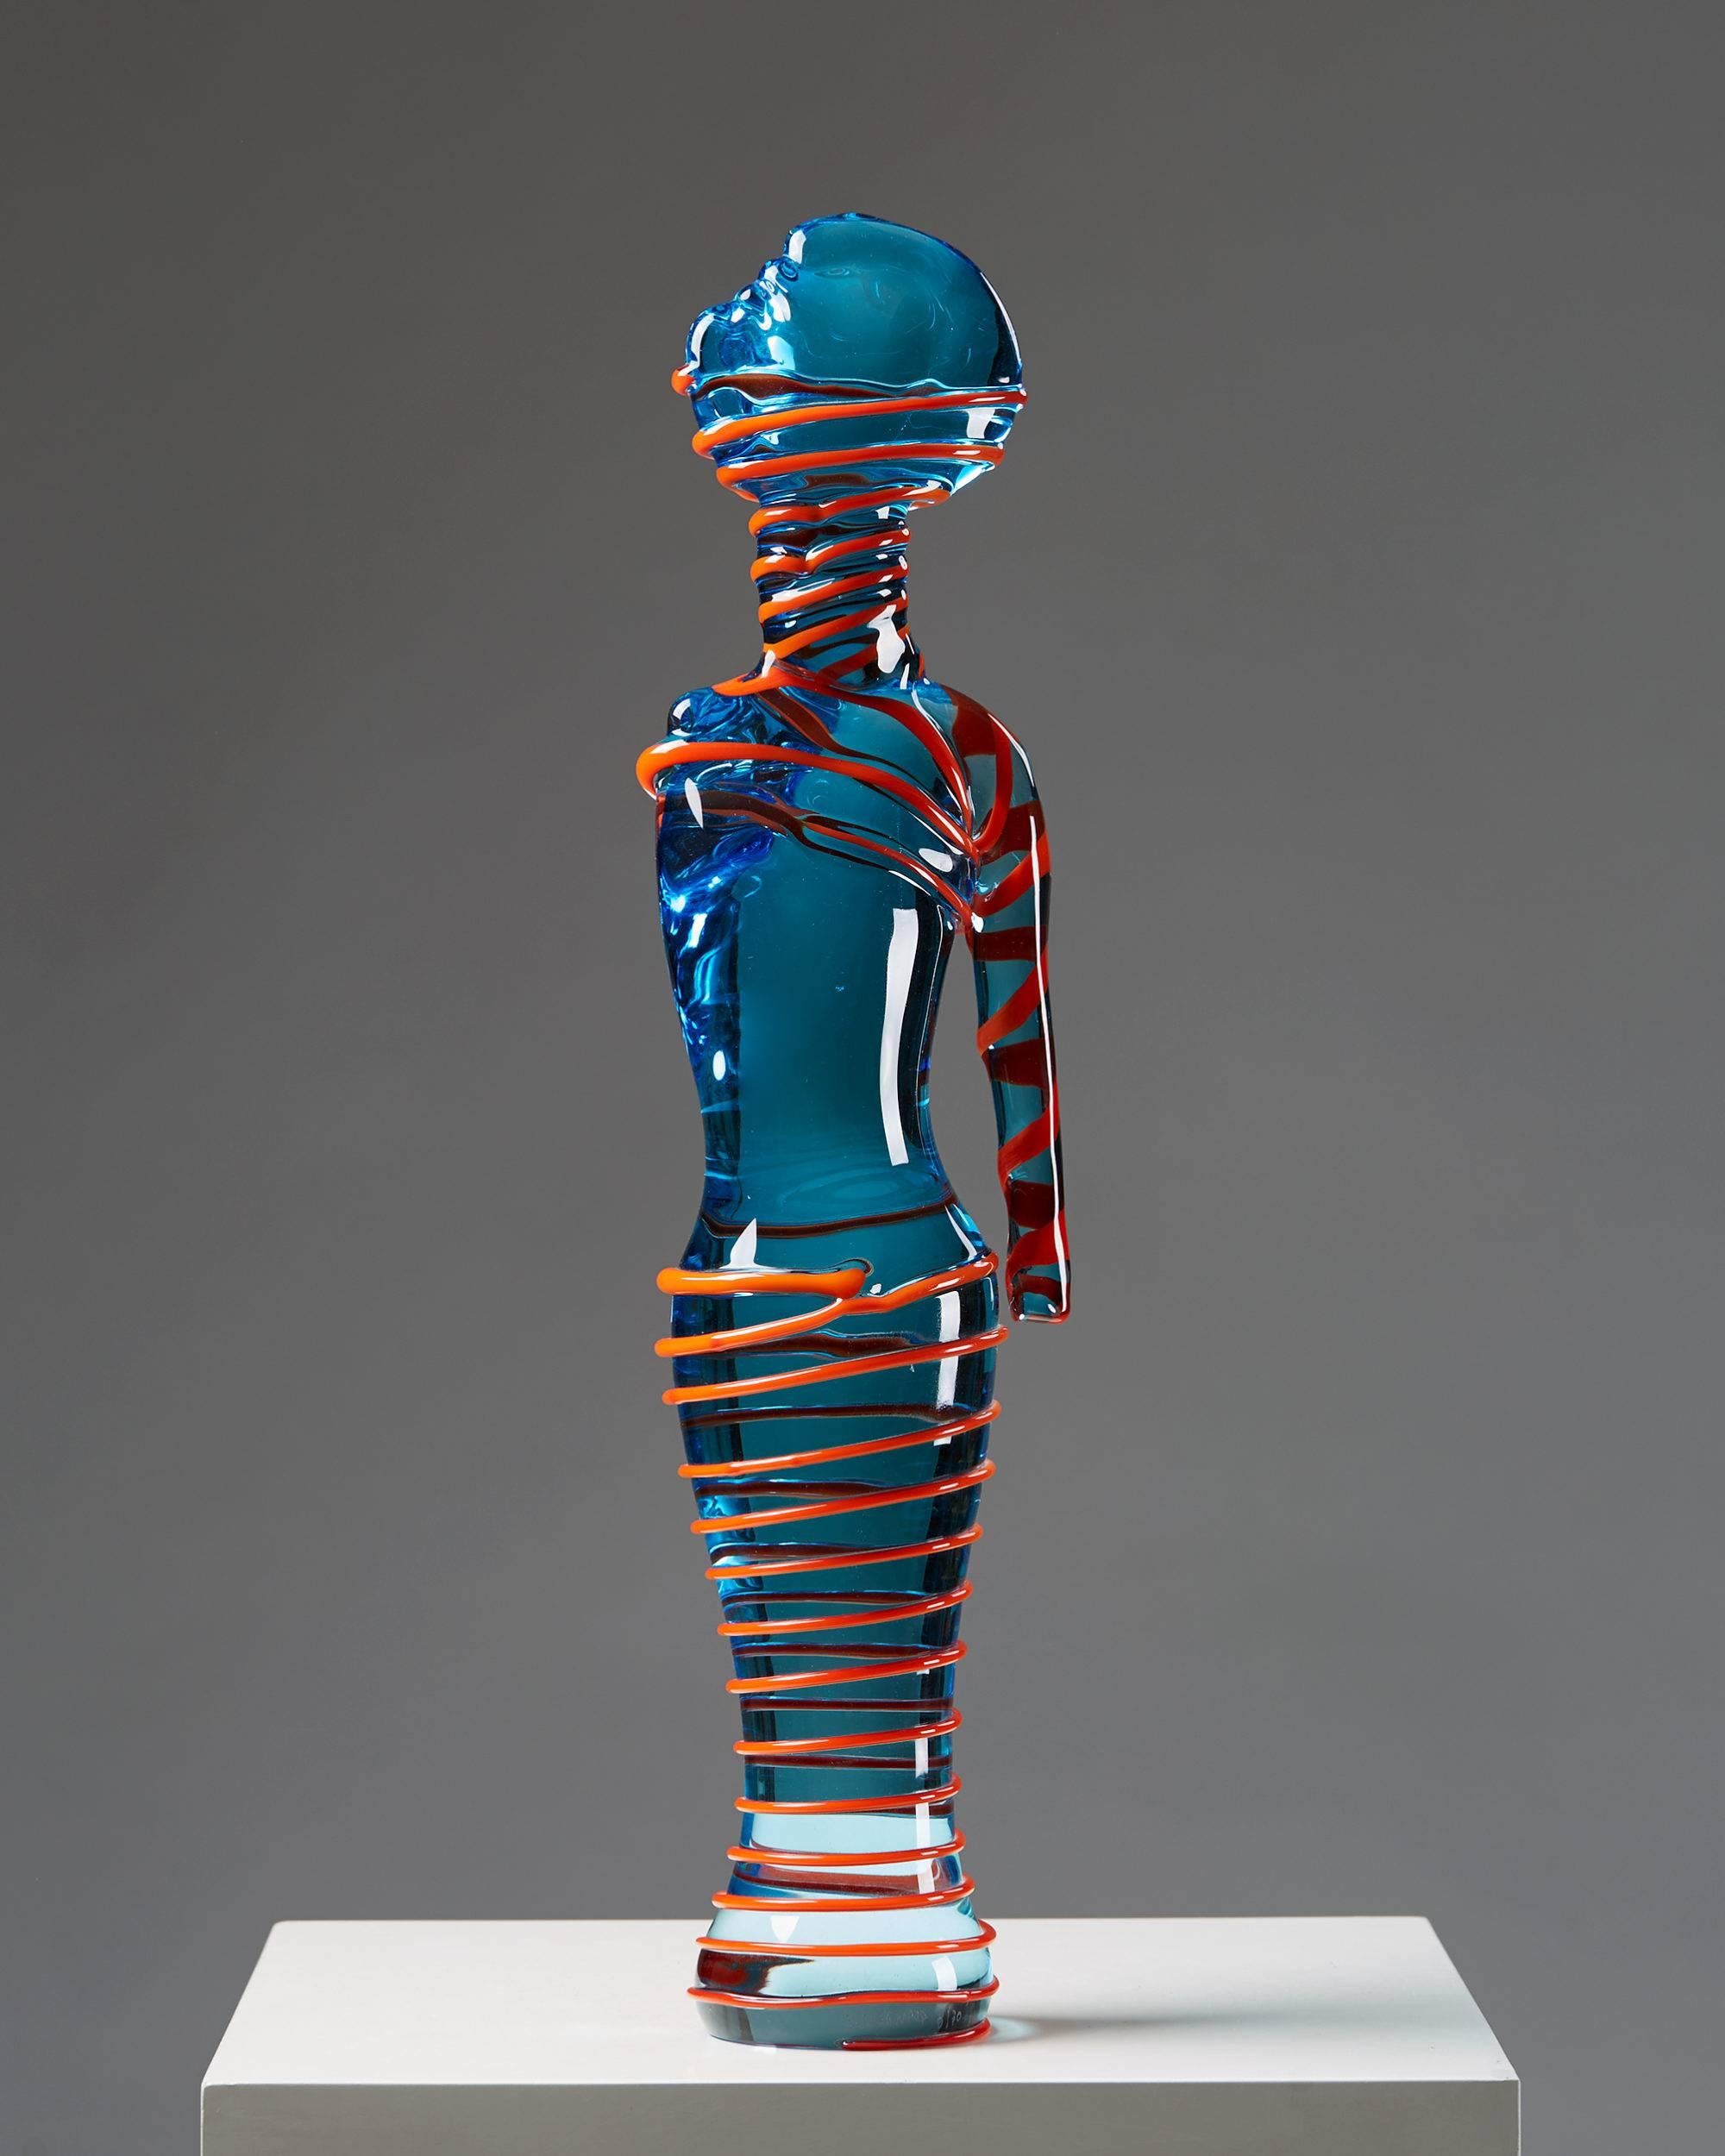 Sculpture “Piccolo Geometrie” designed by James Coignard for Berengo Studio, Murano,
Italy. 2003. Glass. Signed and numbered J. Coignard 6/30.
Measure: H 54.5 cm/ 21 1/2''.

 